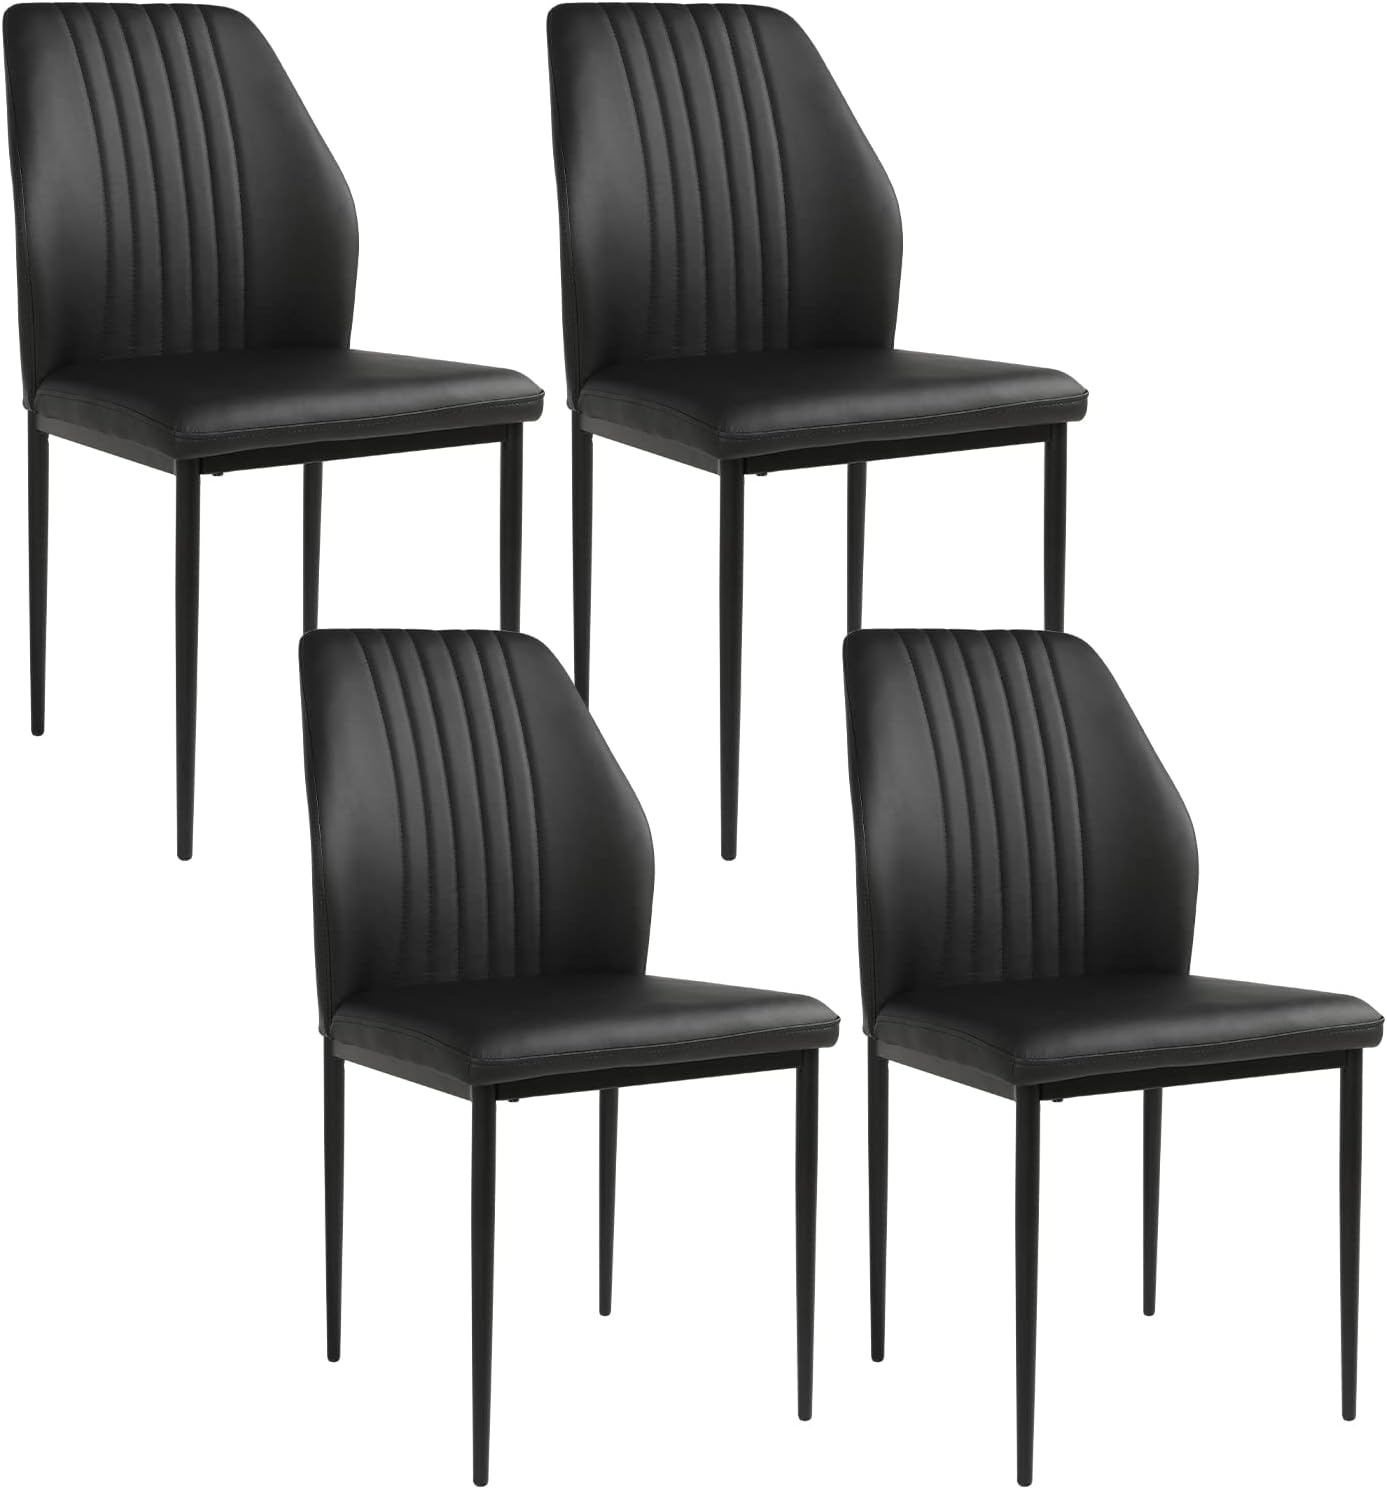 ZckyCine Dining Chair PU Leather Living Room Chair Modern Kitchen Armless Side Chair with Metal Legs (Black, Set of 4)